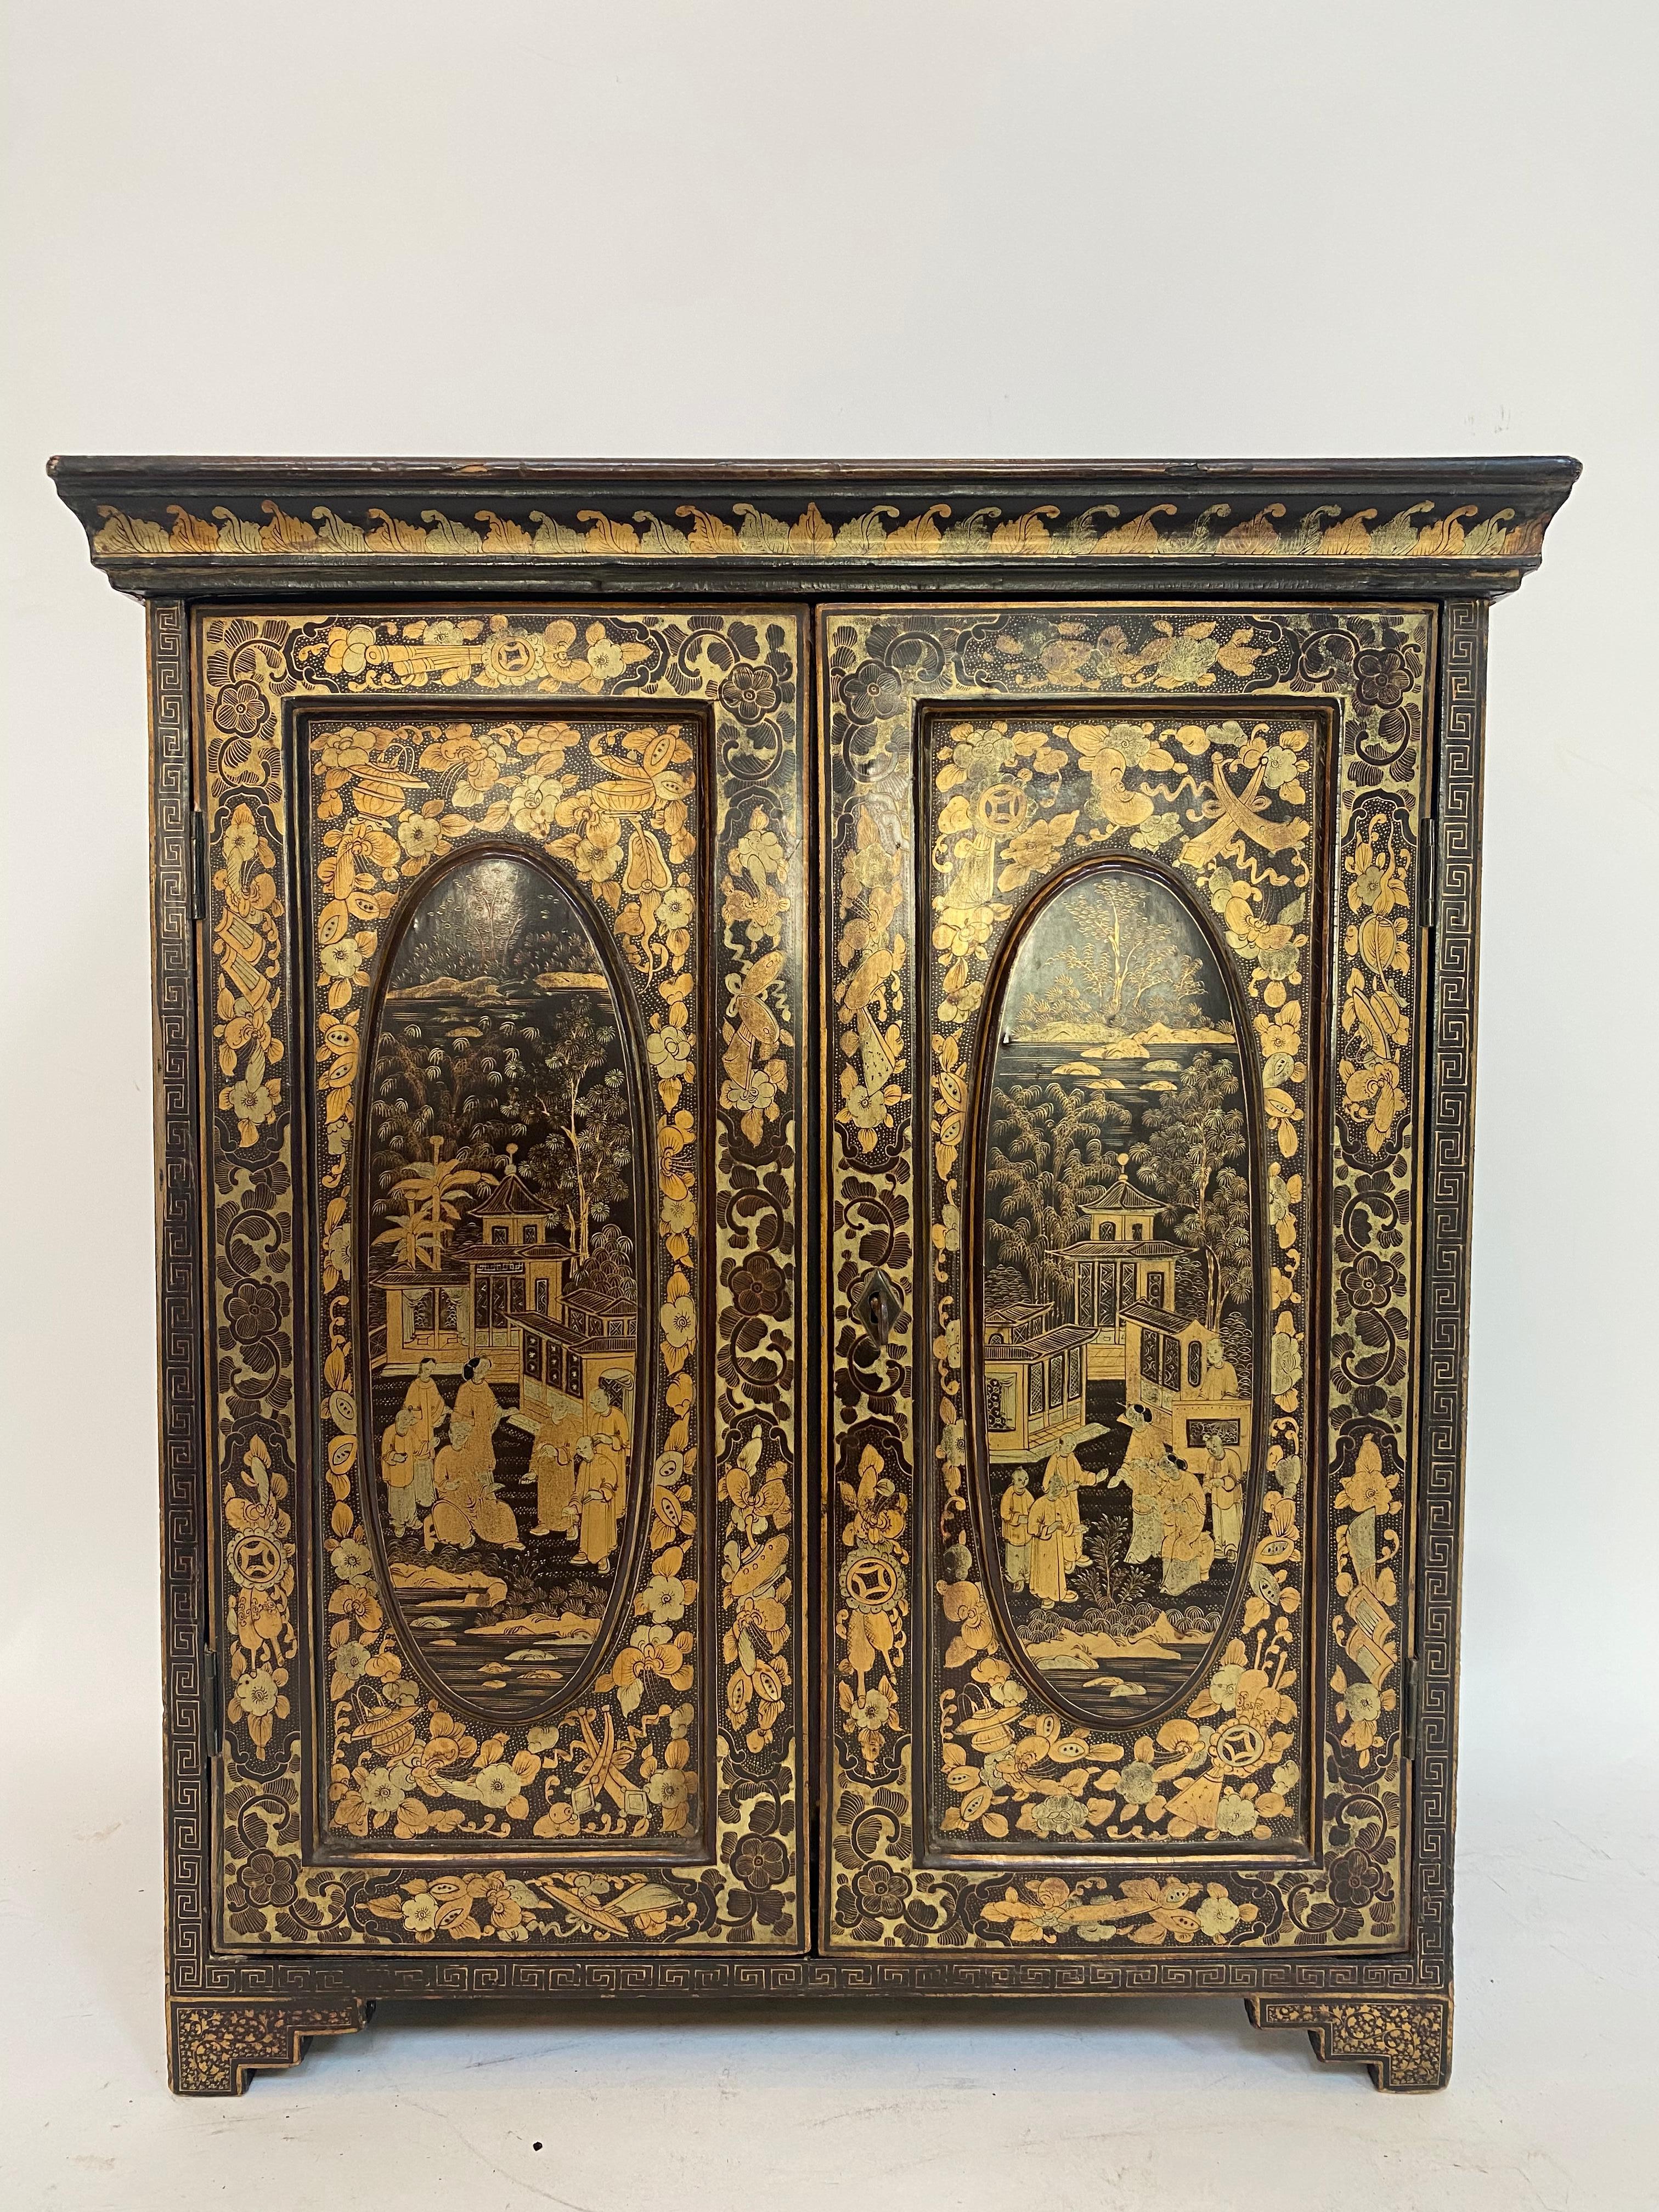 19th century antique hand painted Chinese lacquer jewelry cabinet with a pair of raised panel doors opening to five drawers with turned ivory handles, decorated throughout gilt with scenes with figures, pavilions trees and flowers in a black ground,